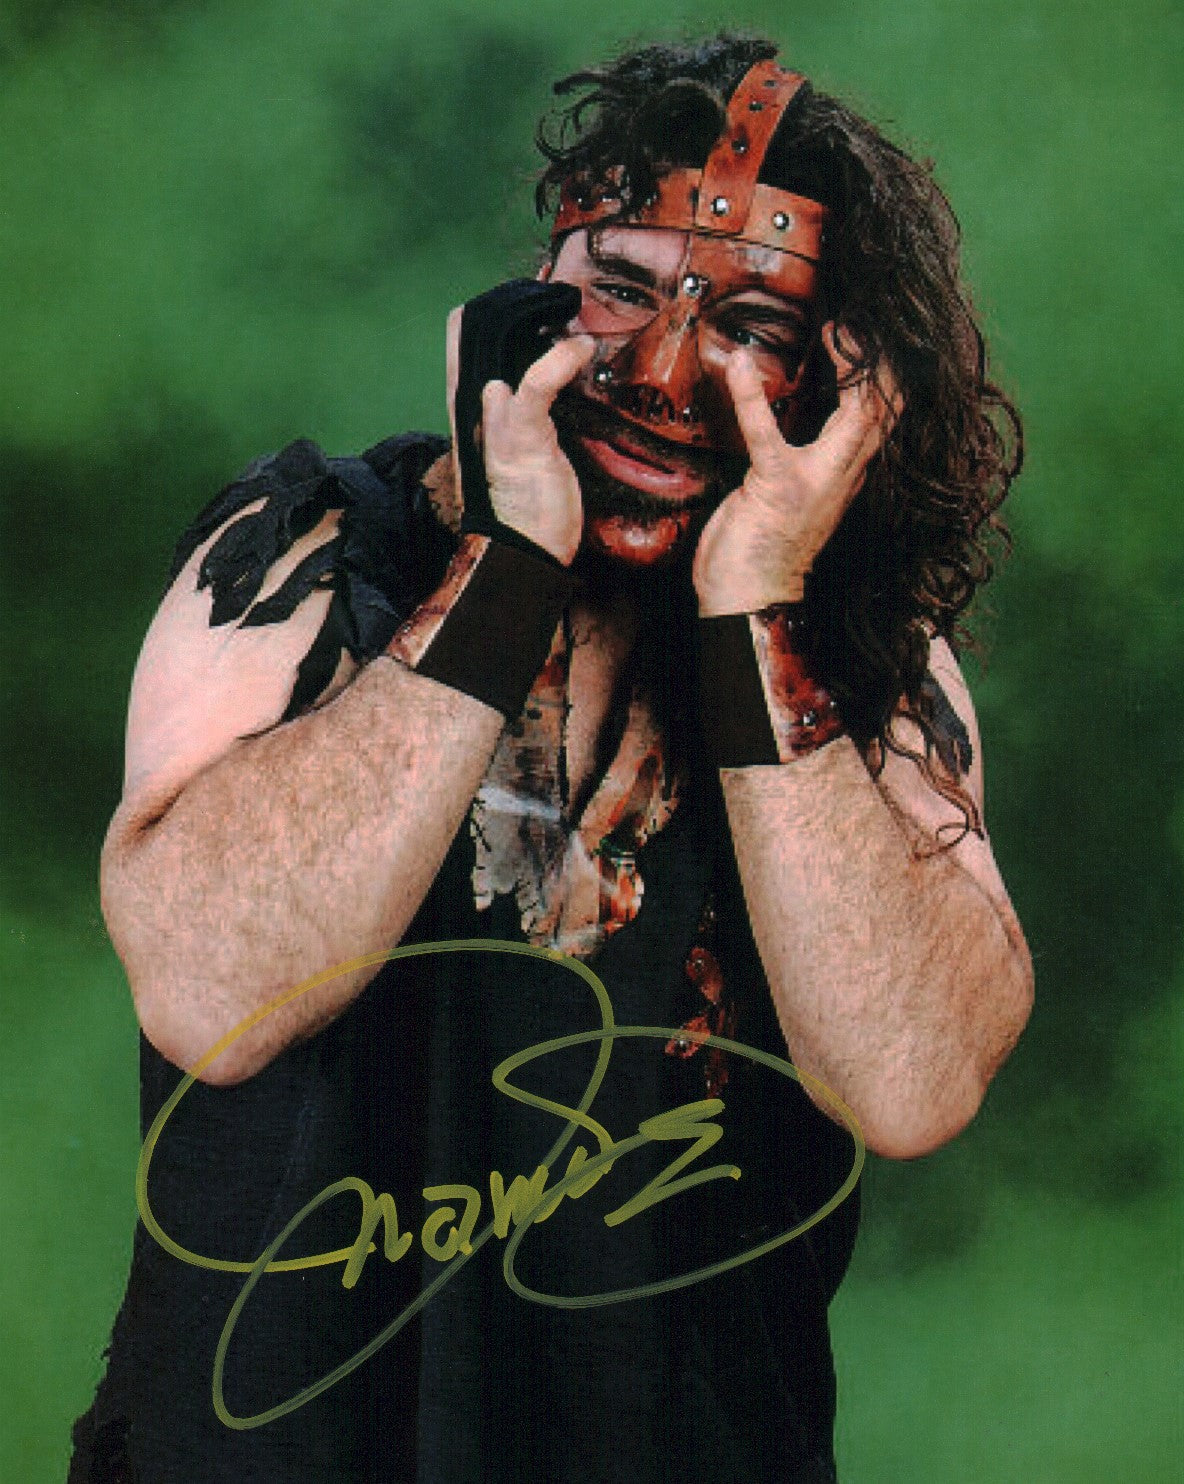 Mick Foley WWE Wrestling 8x10 Signed Photo Poster JSA Certified Autograph GalaxyCon